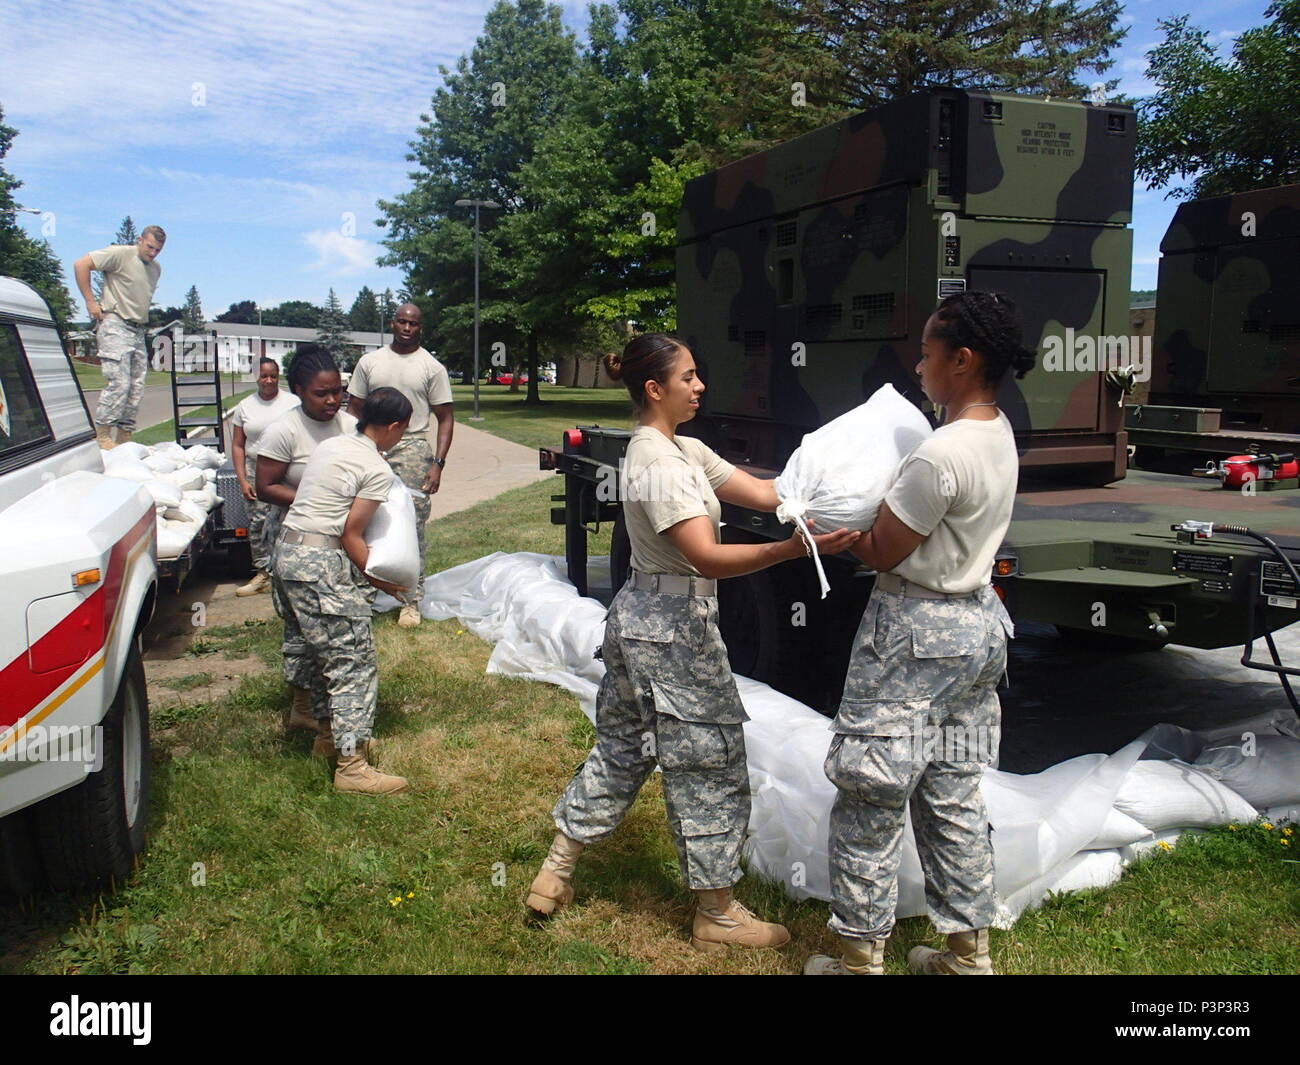 Soldiers from Company A, 48th Combat Support Hospital out of Fort Story, Va., remove sandbags during the pack up of the Greater Chenango Cares Innovative Readiness Training event, July 24, 2016. Greater Chenango Cares is one of the IRT events which provides real-world training in a joint civil-military environment while delivering world-class medical care to the people of Chenango County, N.Y., from July 15-24. Stock Photo